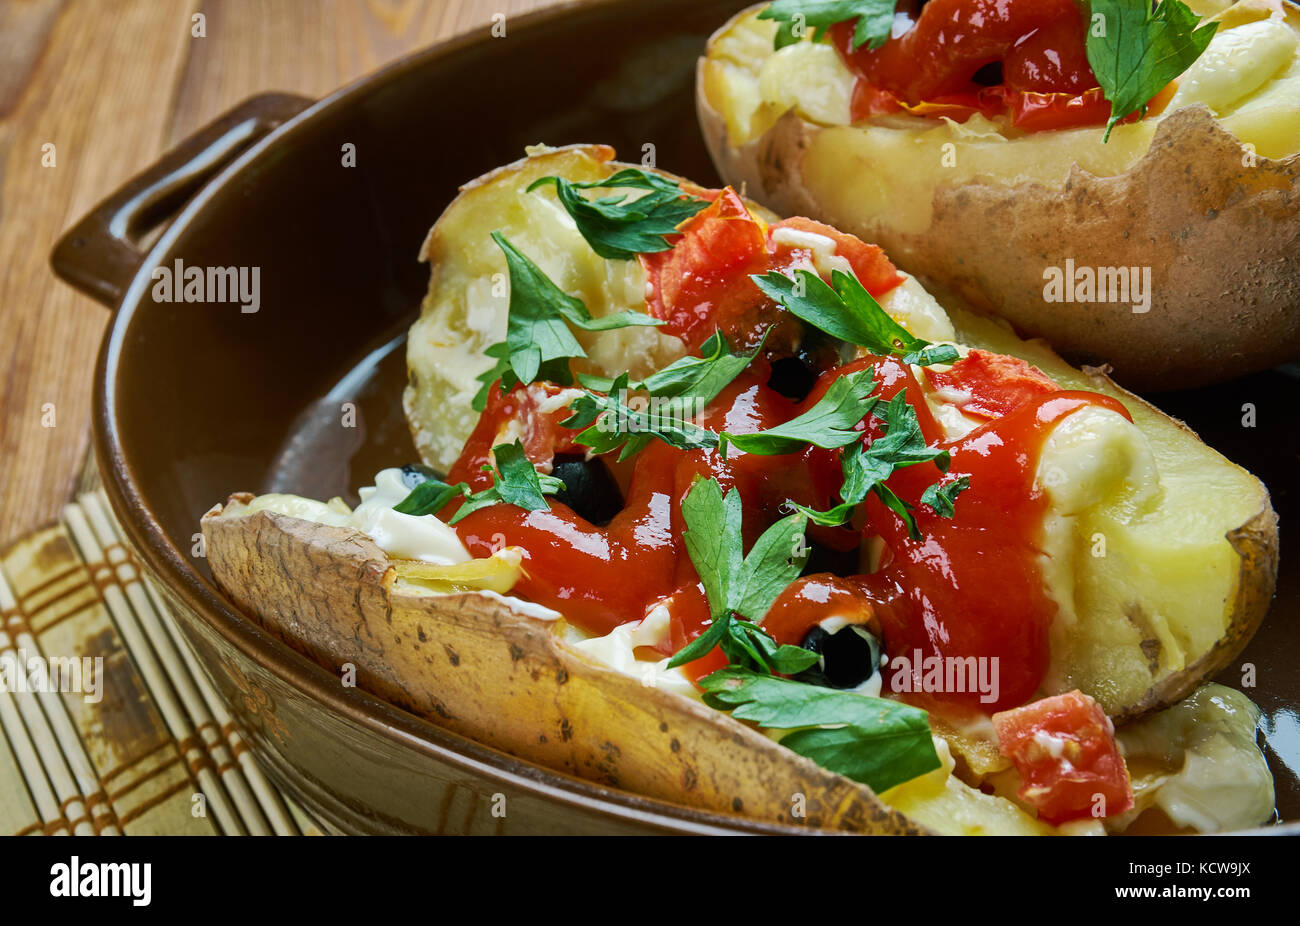 Kumpir - baked potato with various fillings is a popular fast food in Turkey. Stock Photo